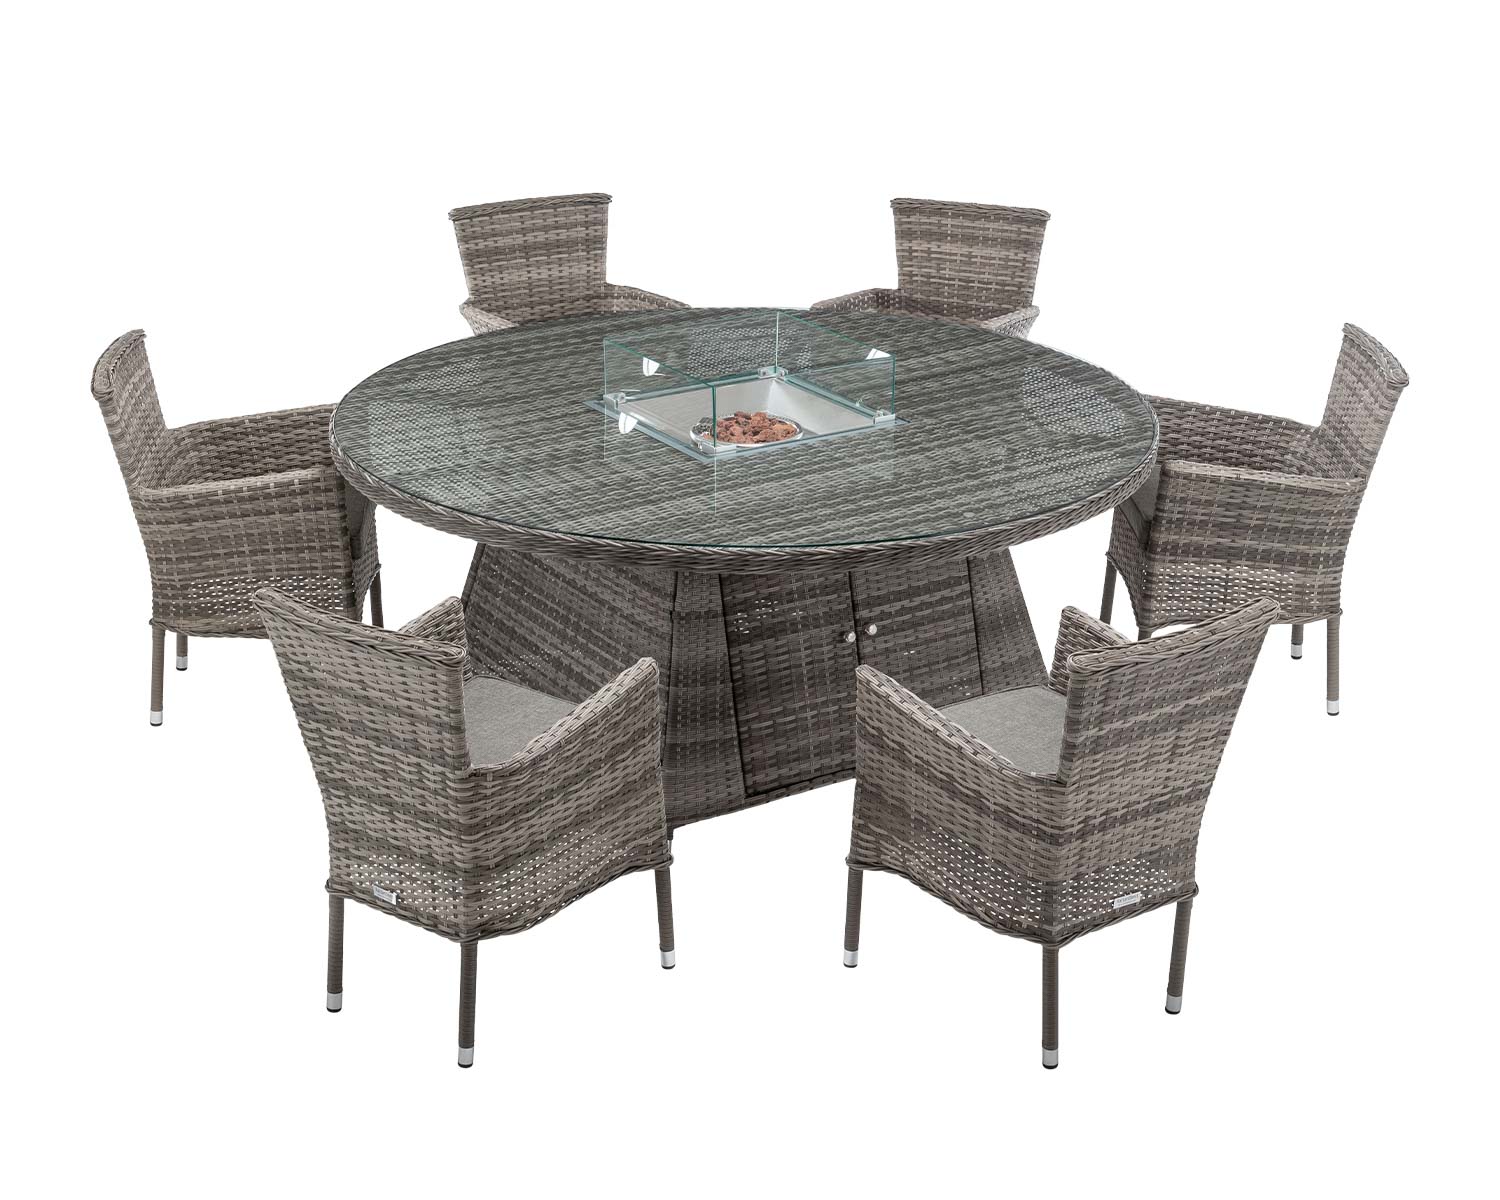 6 Seat Rattan Garden Dining Set With Large Round Table In Grey With Fire Pit Cambridge Rattan Direct